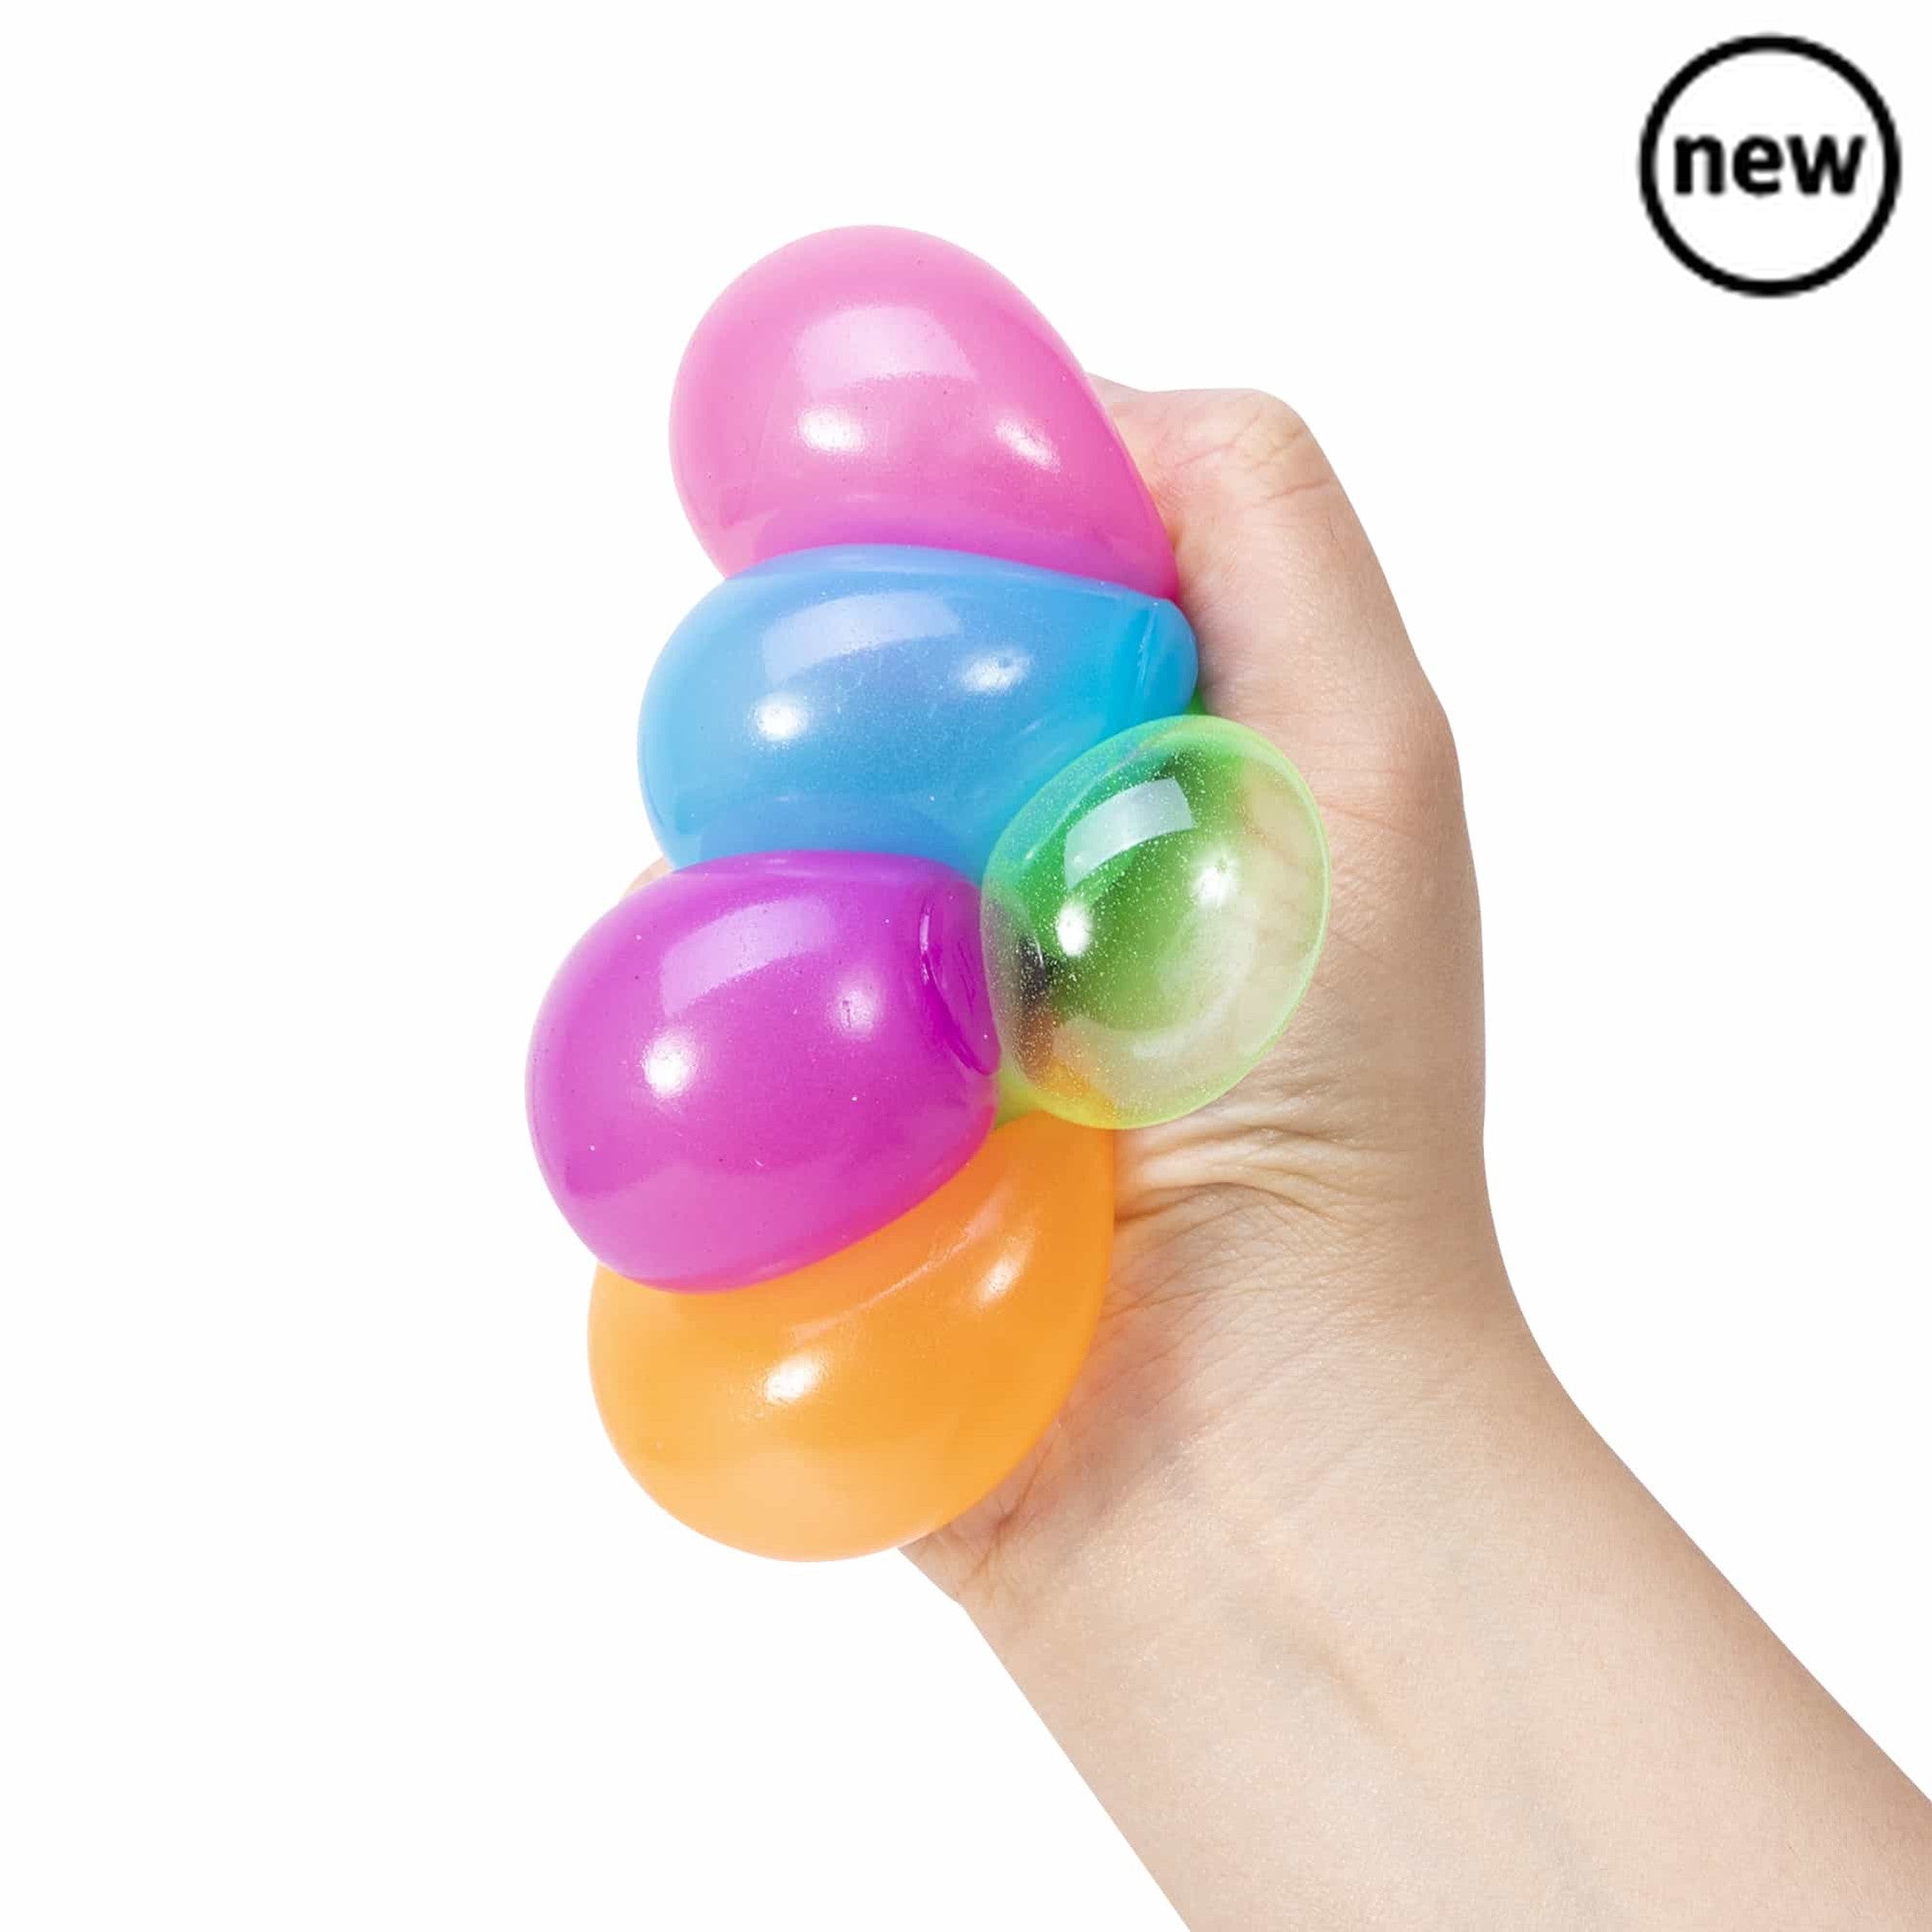 Stickums Needoh, Nee Doh Stickums have a sticky outer skin and a cushy air-filled centre, perfect for squishing, squeezing and smushing!Coming in a compact pack of 12, your sticky-wicky, wally-crawly, glow-in-the-dark globs will cling together, or stick to the windows and walls! They're lightweight, and perfect for sticky rolling or squeezing sensory play. If they lose their stick, simply wash them with warm soap and water! What a wonderful low impact play activity for curious minds, offering a sense of cal